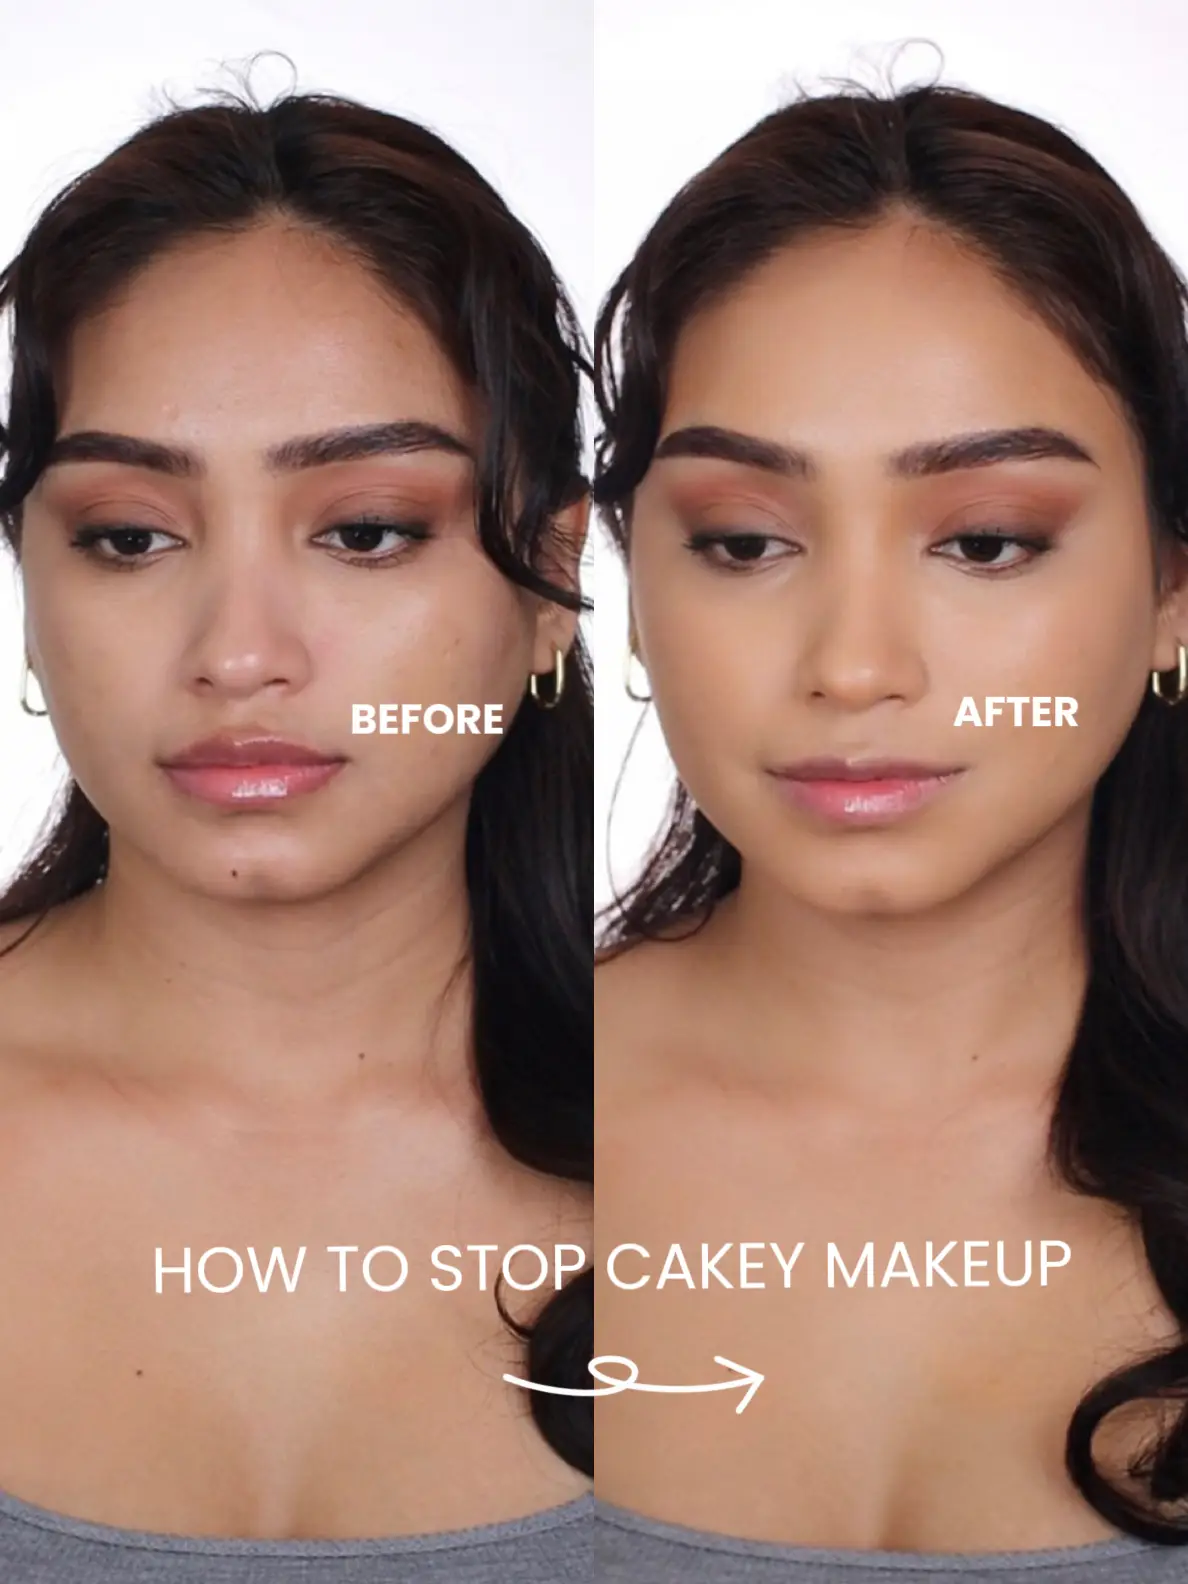 How To Stop Cakey Makeup Gallery